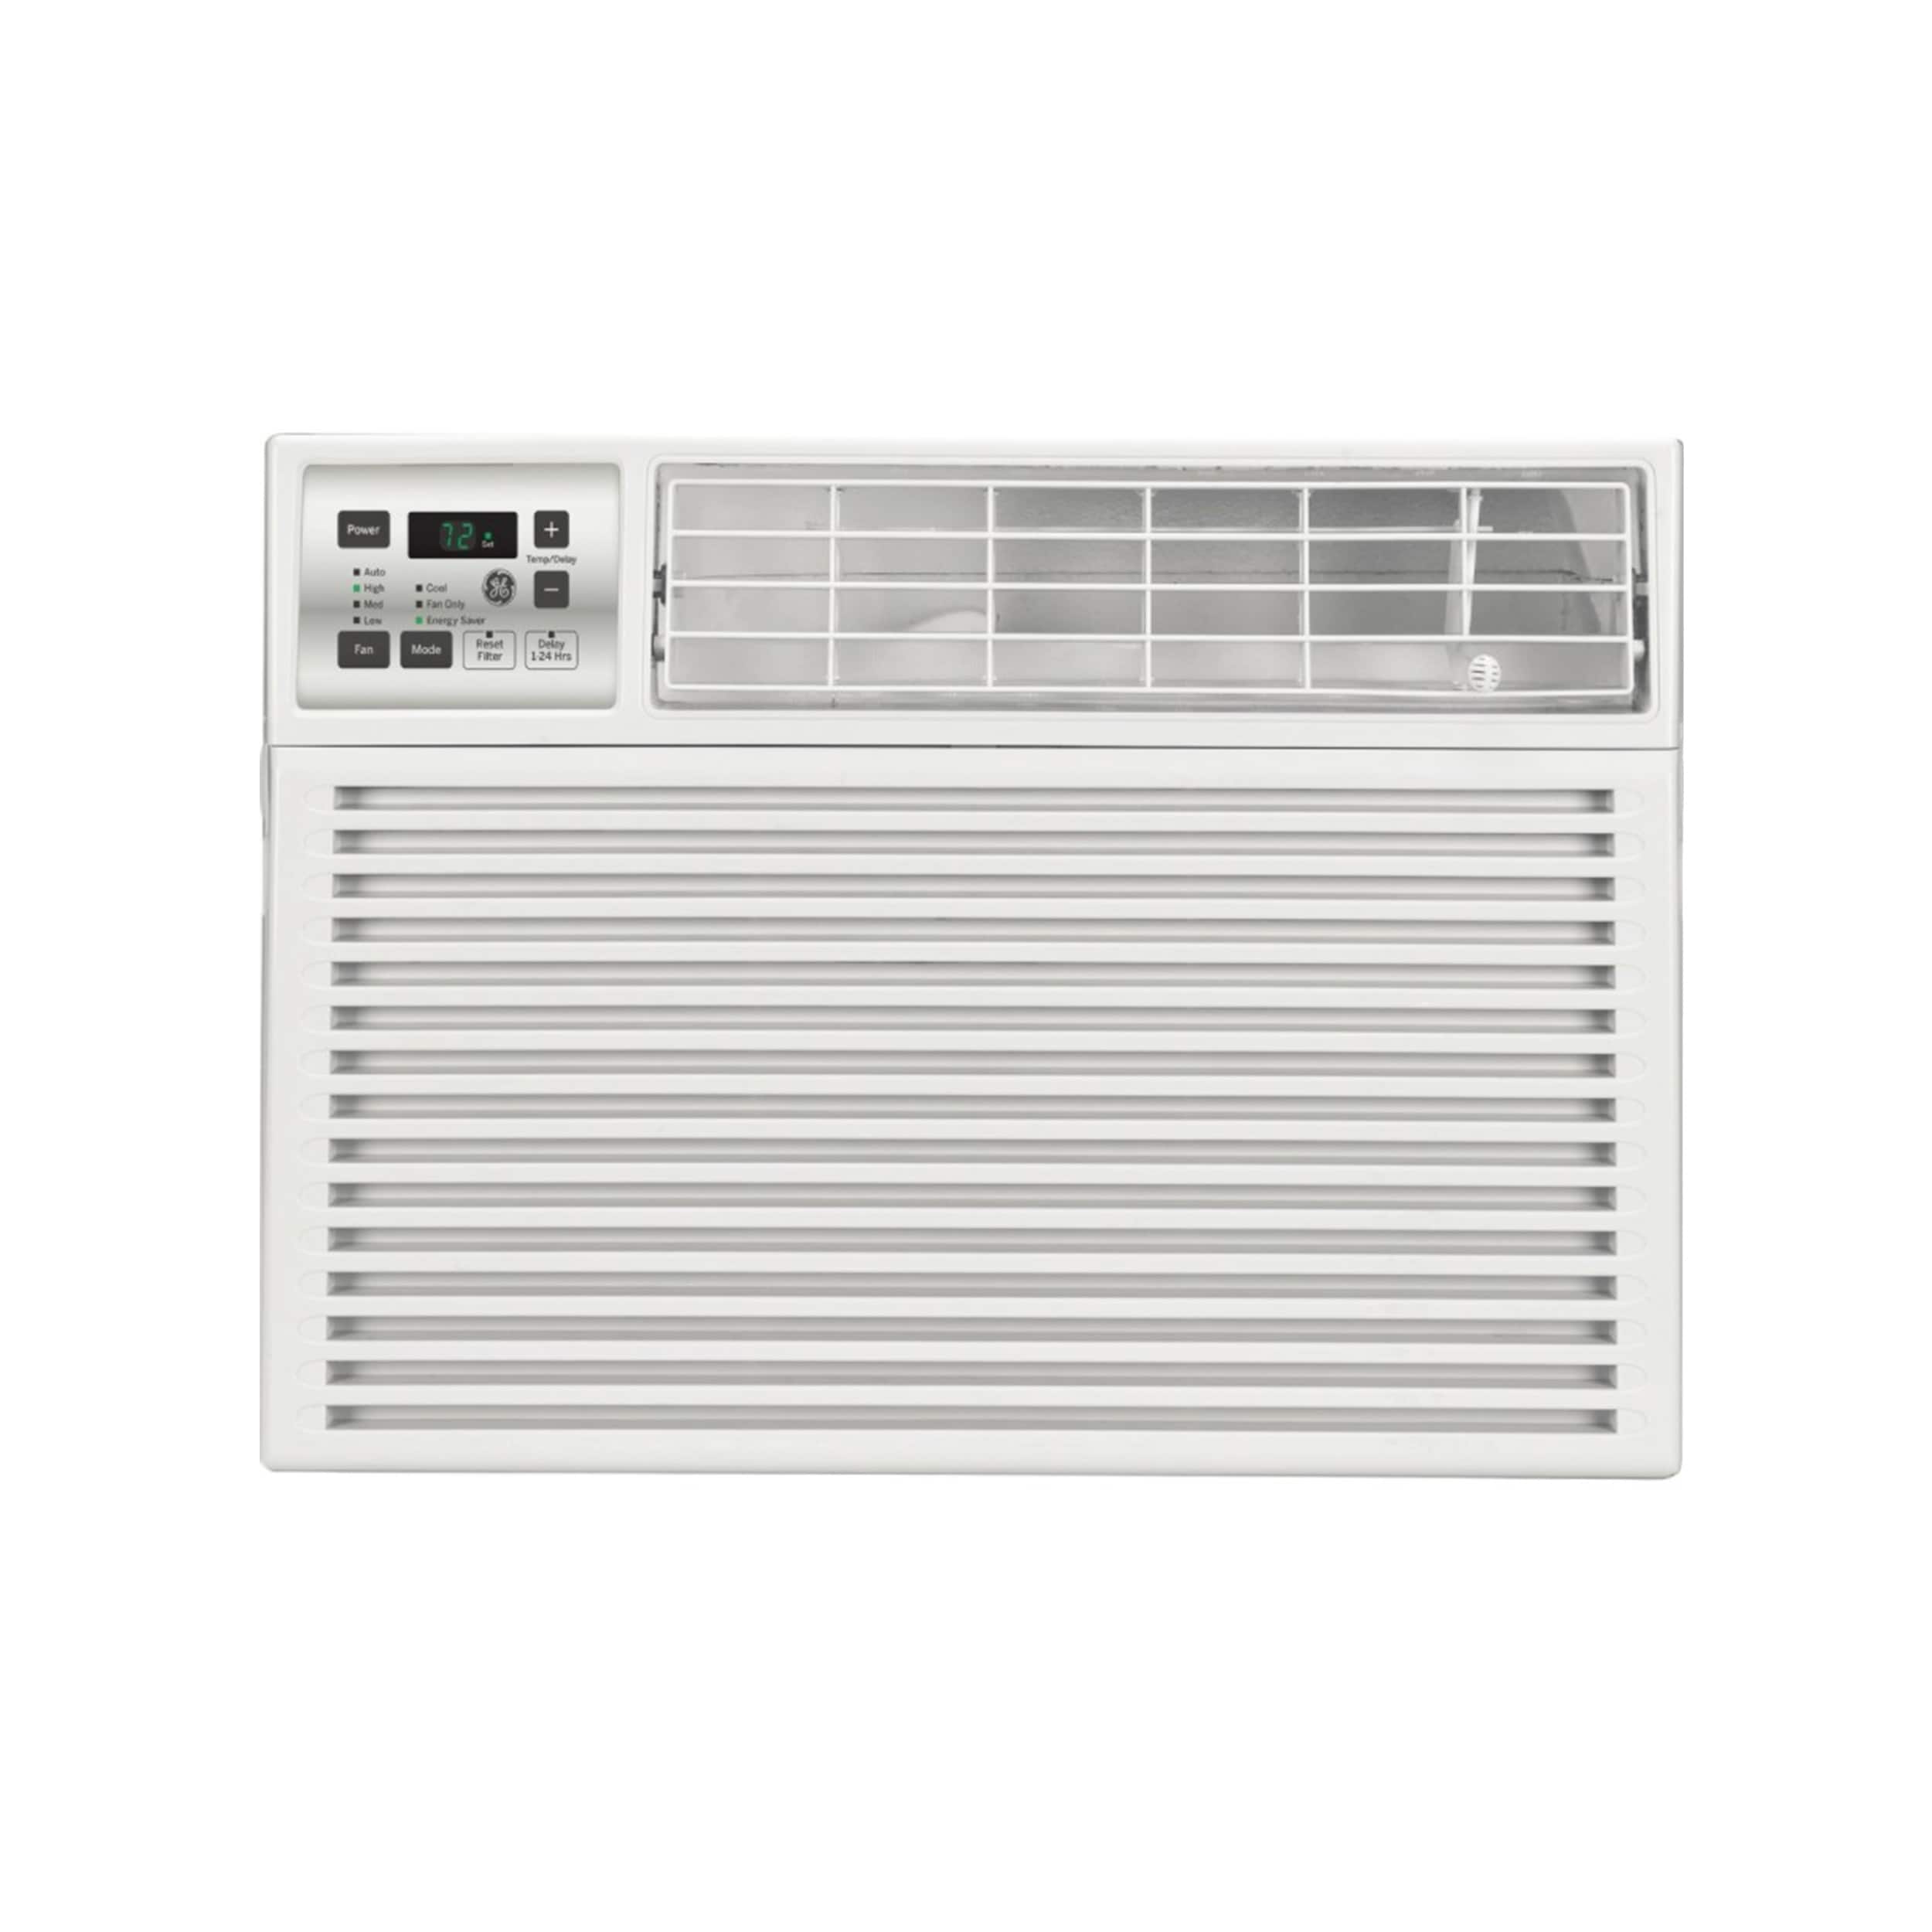 Refurbished GE ENERGY STAR 230 Volt Electronic Room Air Conditioner